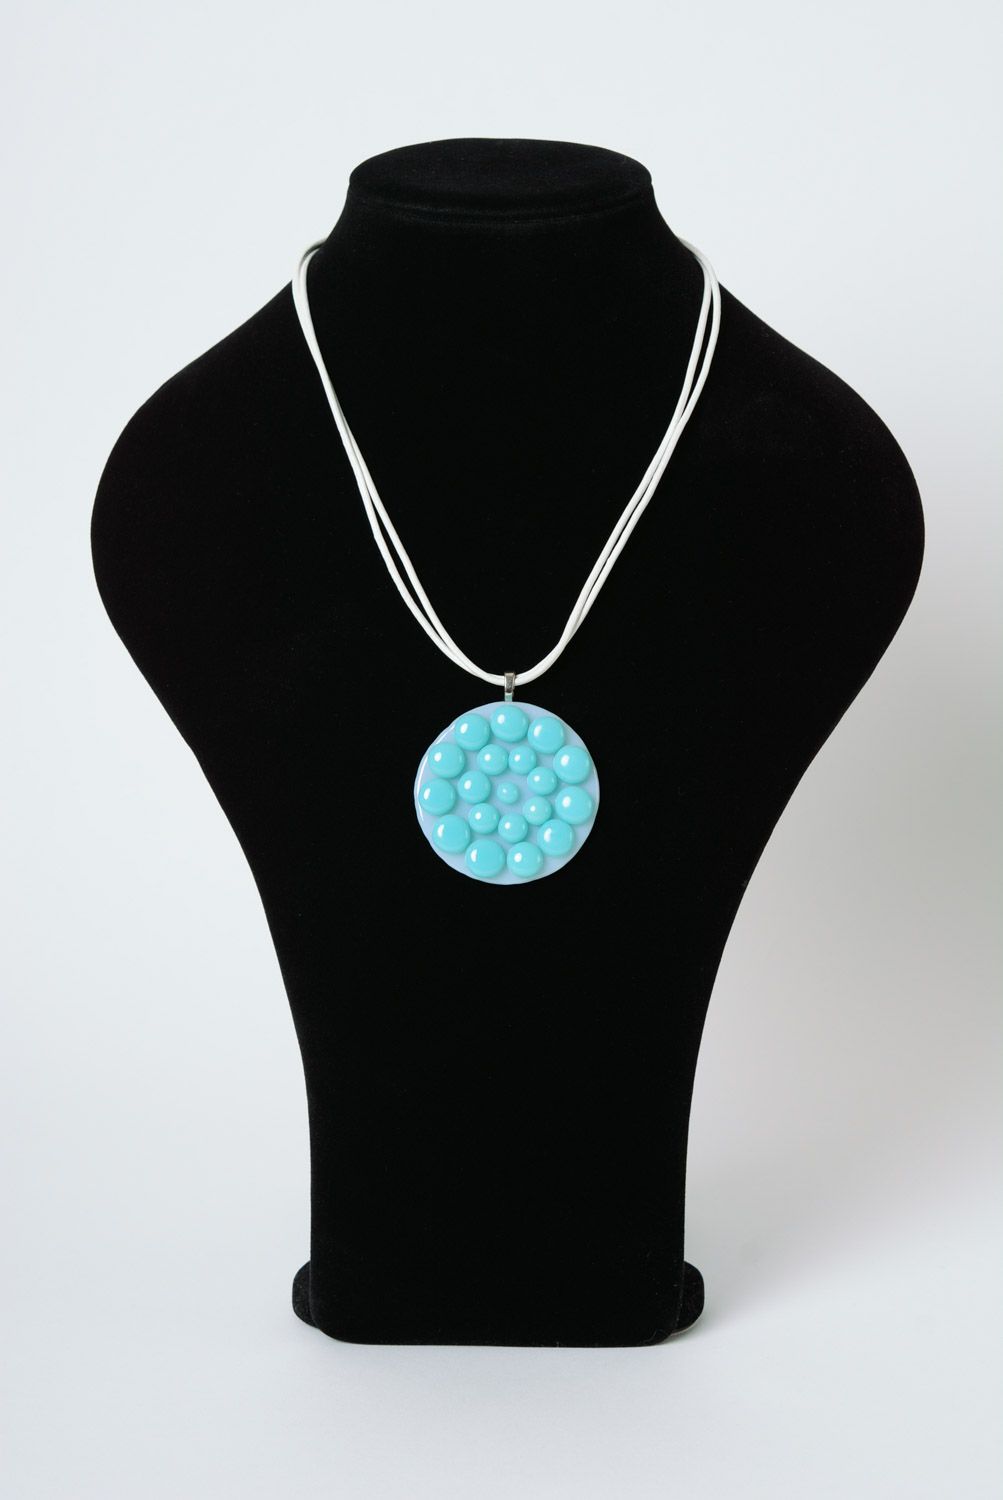 Handmade round fusing glass pendant in white and blue colors on cord for women photo 2